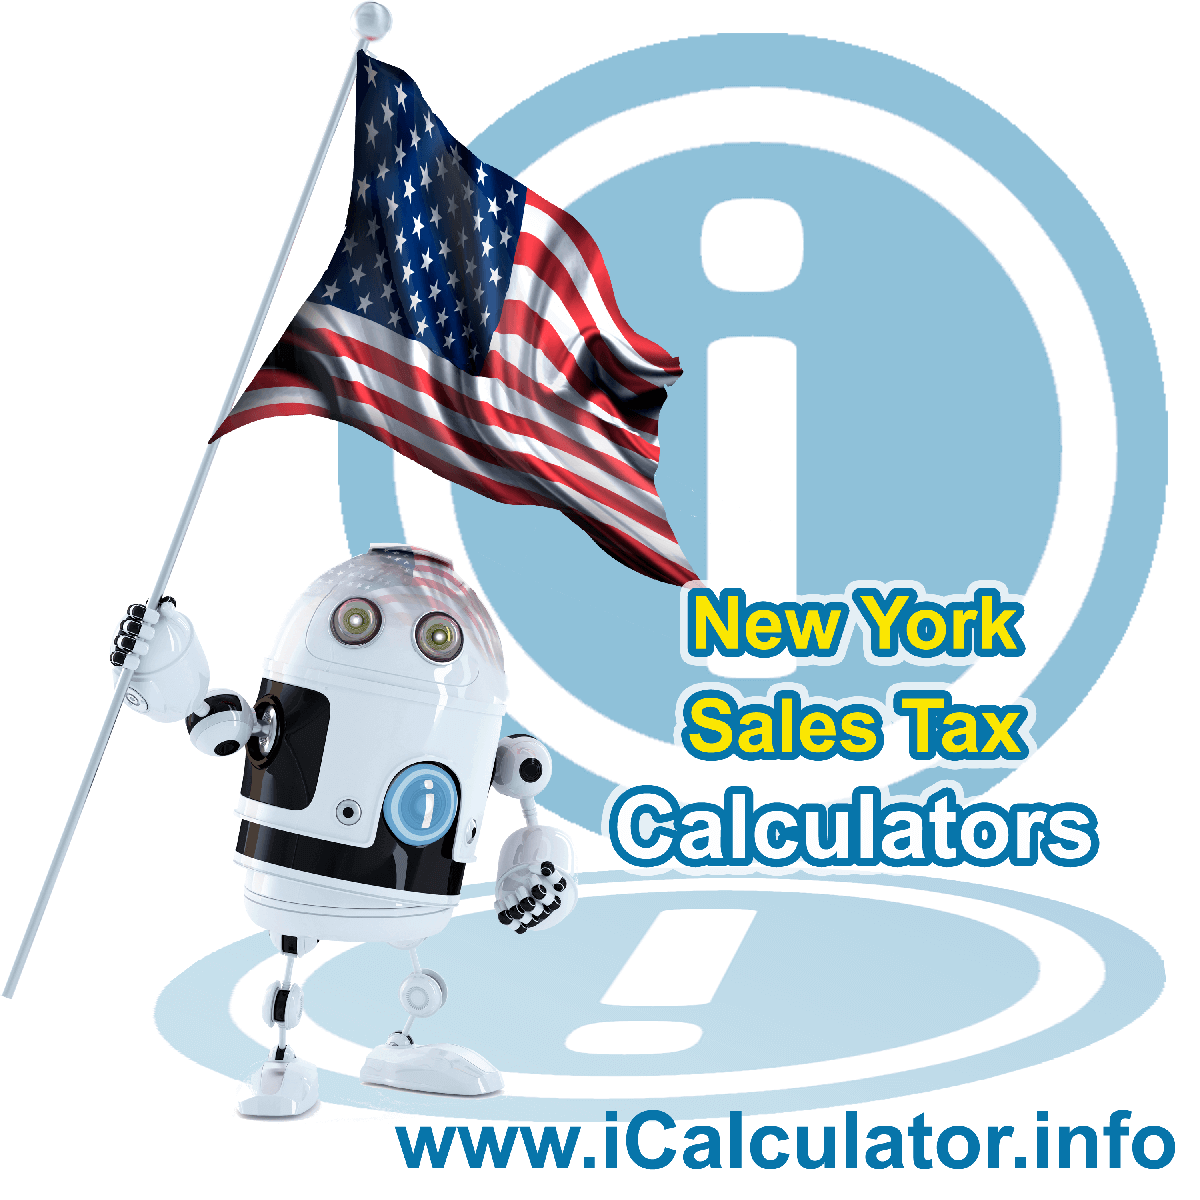 Chenango County Sales Rates: This image illustrates a calculator robot calculating Chenango County sales tax manually using the Chenango County Sales Tax Formula. You can use this information to calculate Chenango County Sales Tax manually or use the Chenango County Sales Tax Calculator to calculate sales tax online.